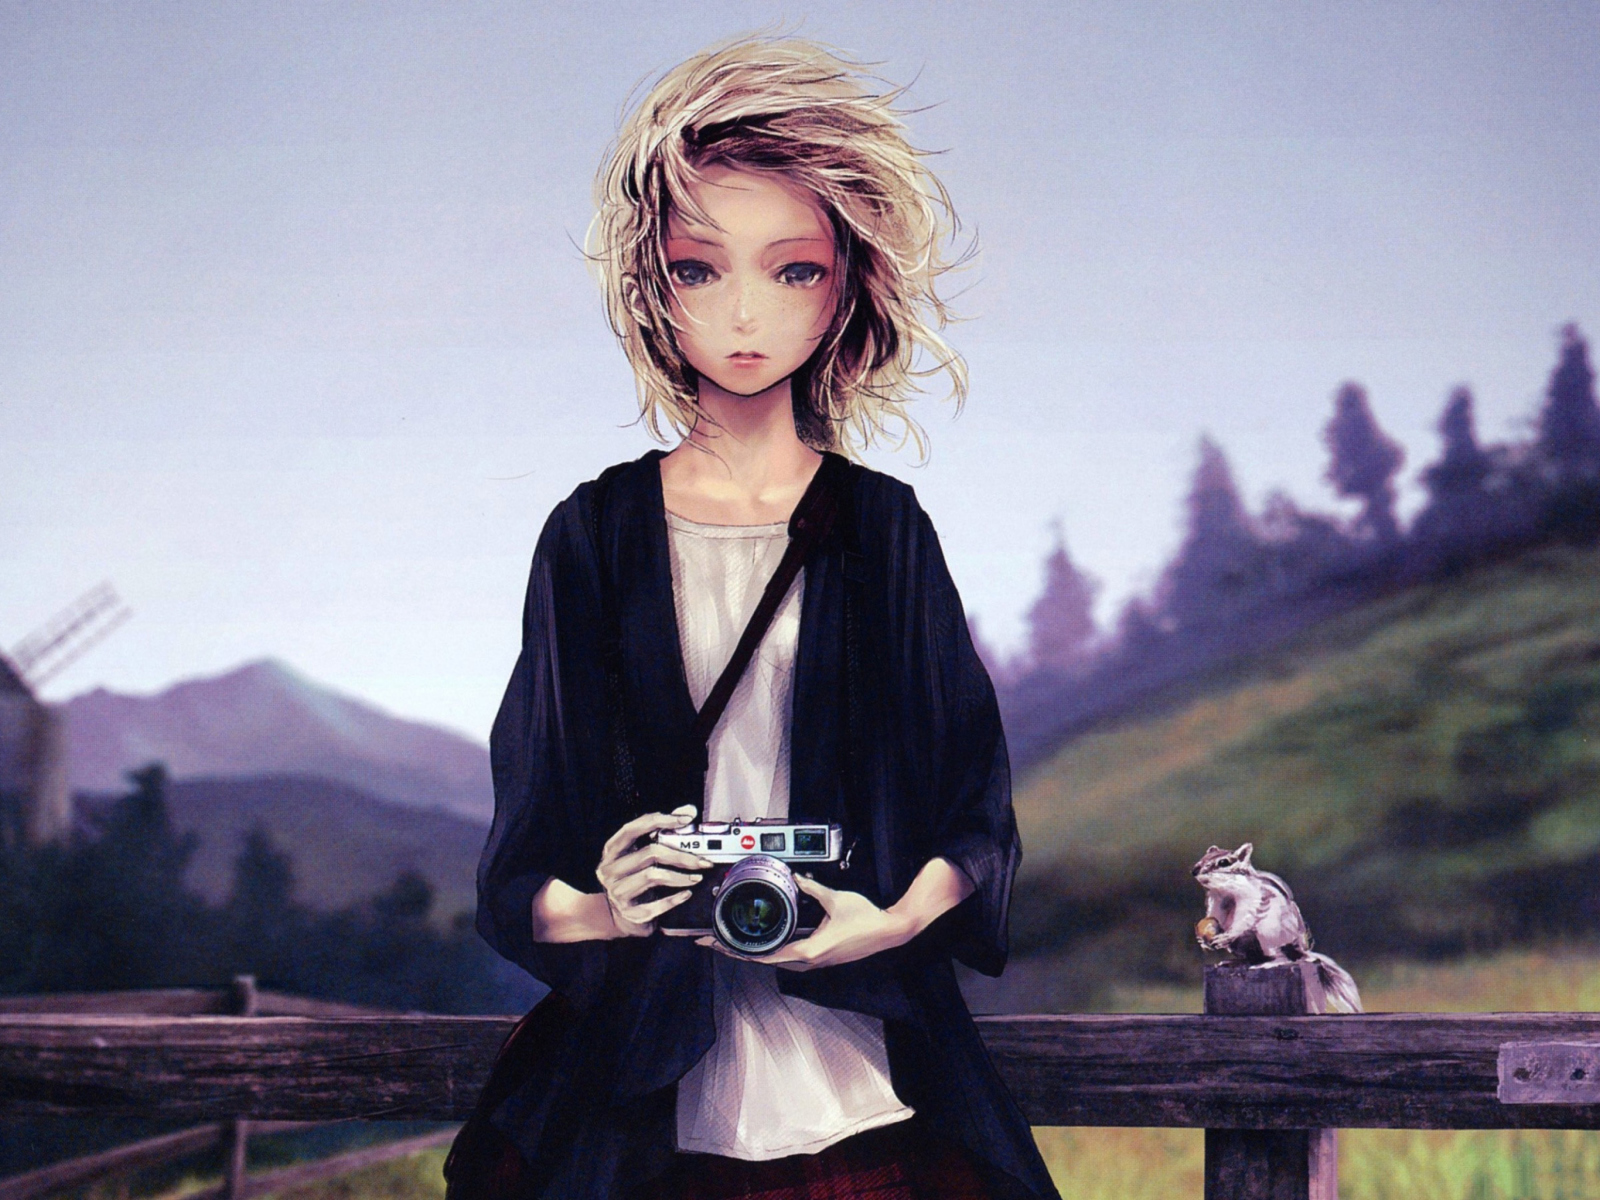 Girl With Photo Camera wallpaper 1600x1200